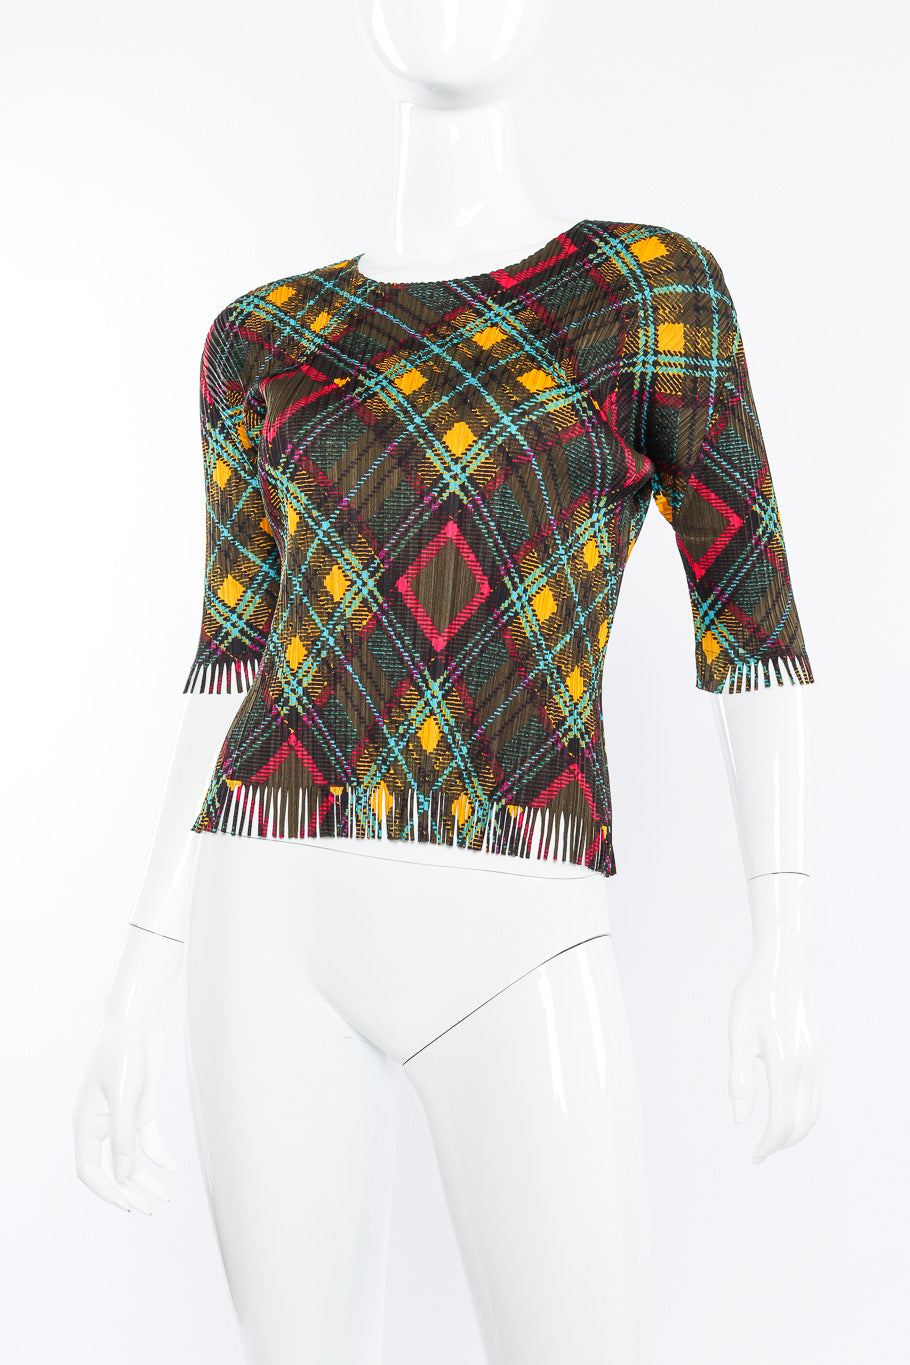 Pleated fringe top by Issey Miyake on mannequin front close @recessla